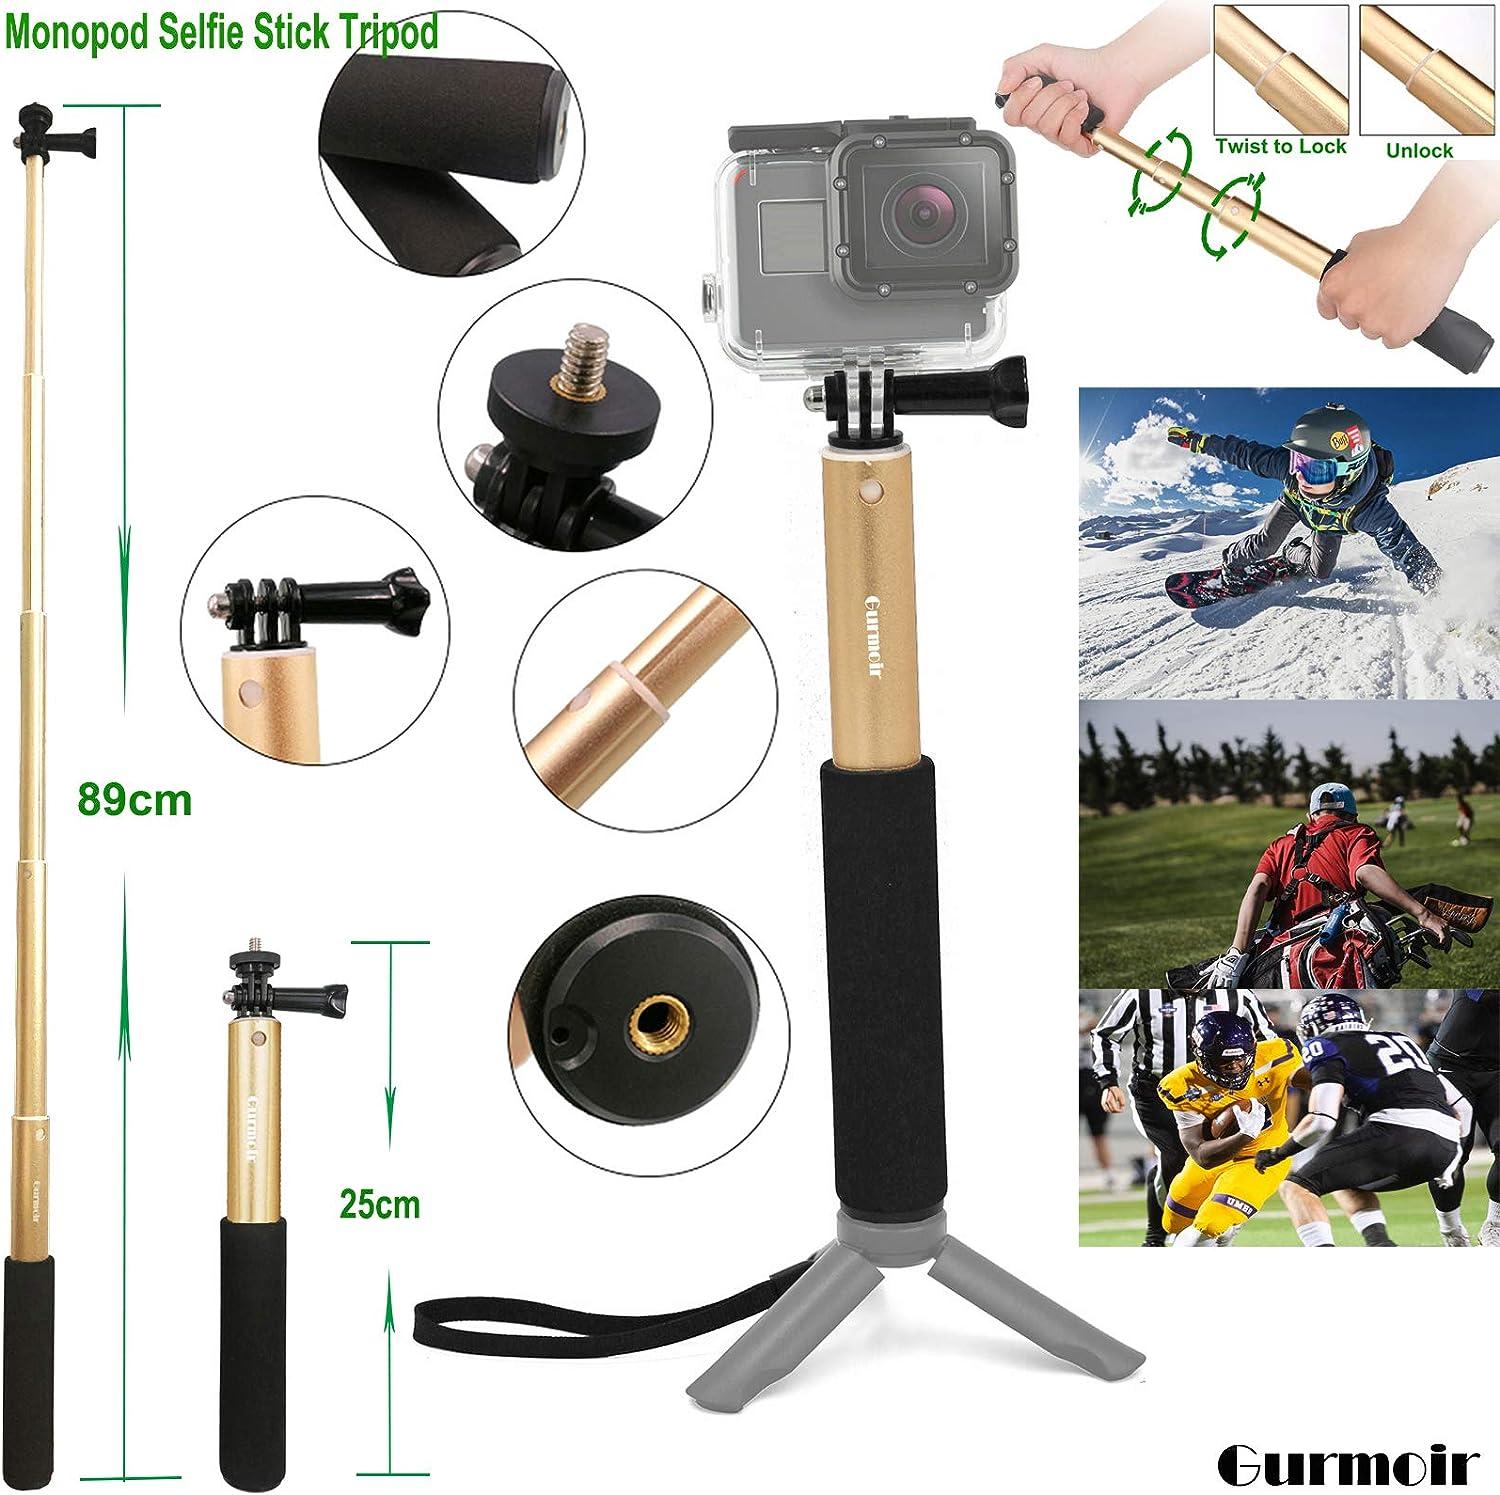 Extendable Selfie Stick Monopod Mount Tripod for GoPro Hero 8 7 6 5 4 and  Other